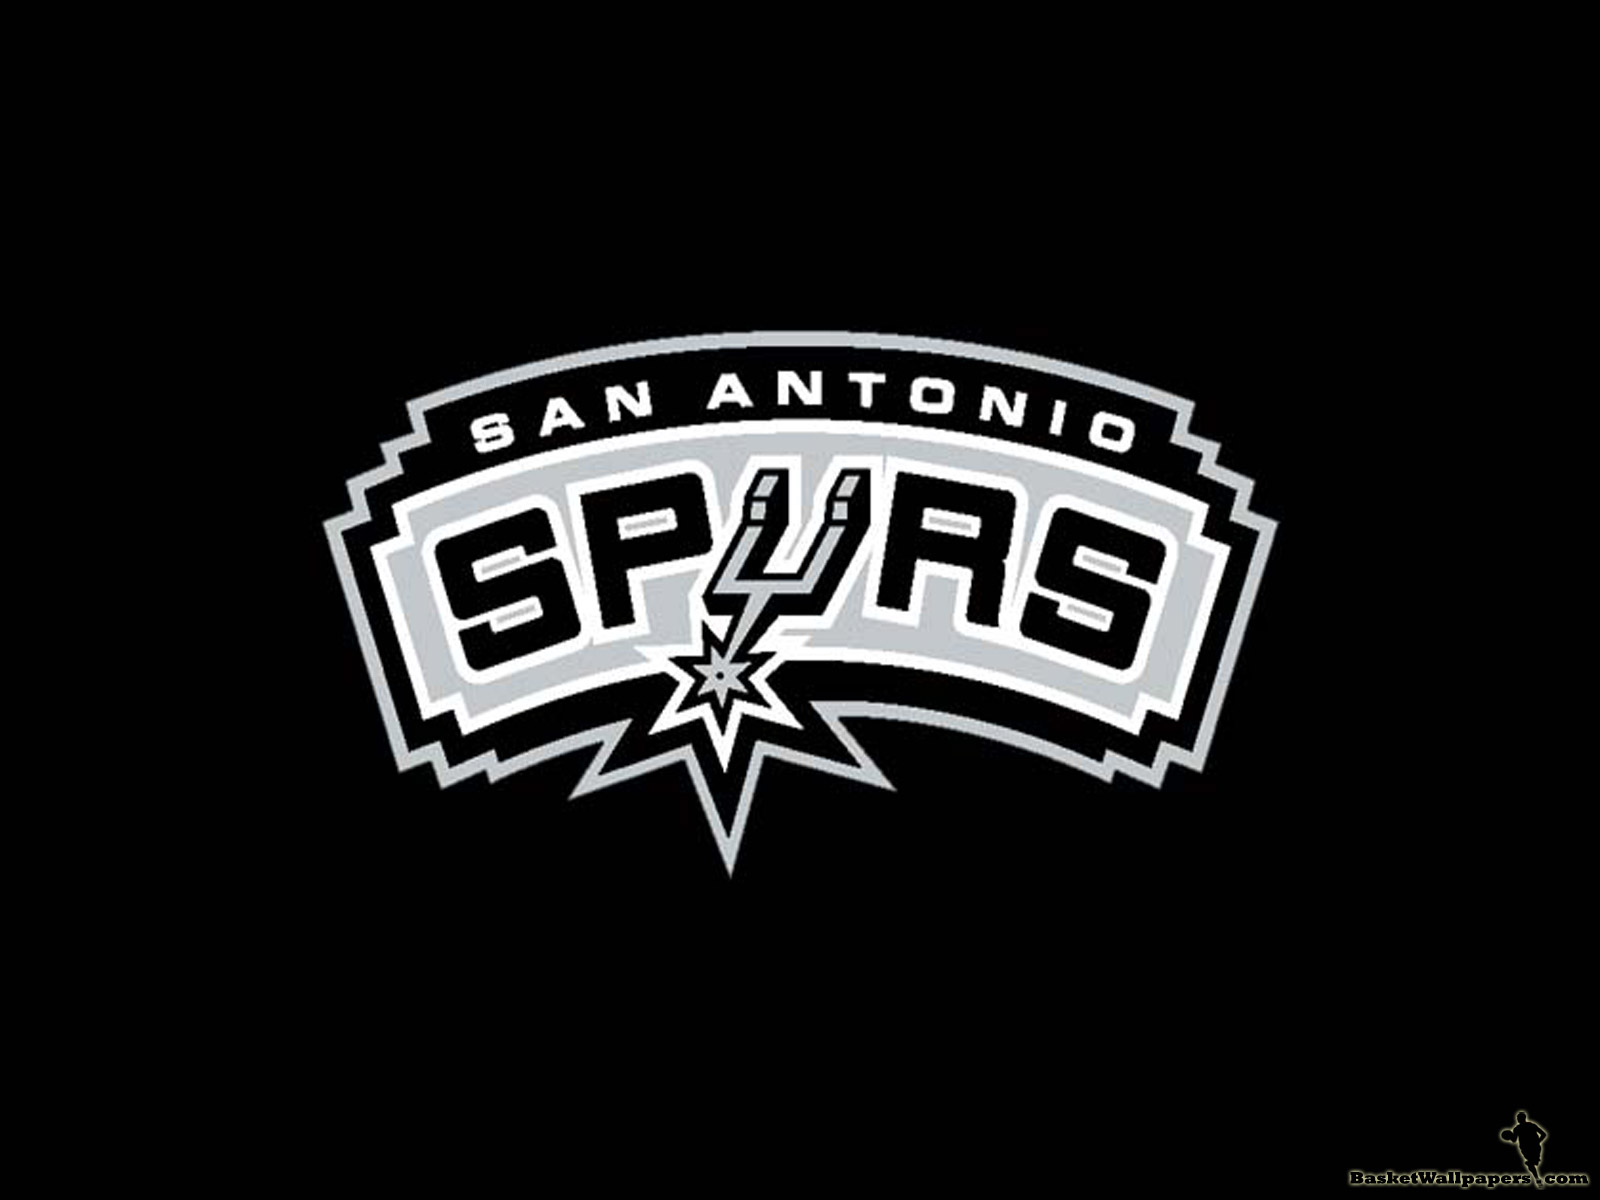 Wallpaper Of San Antonio Spurs Same As In These Few Other